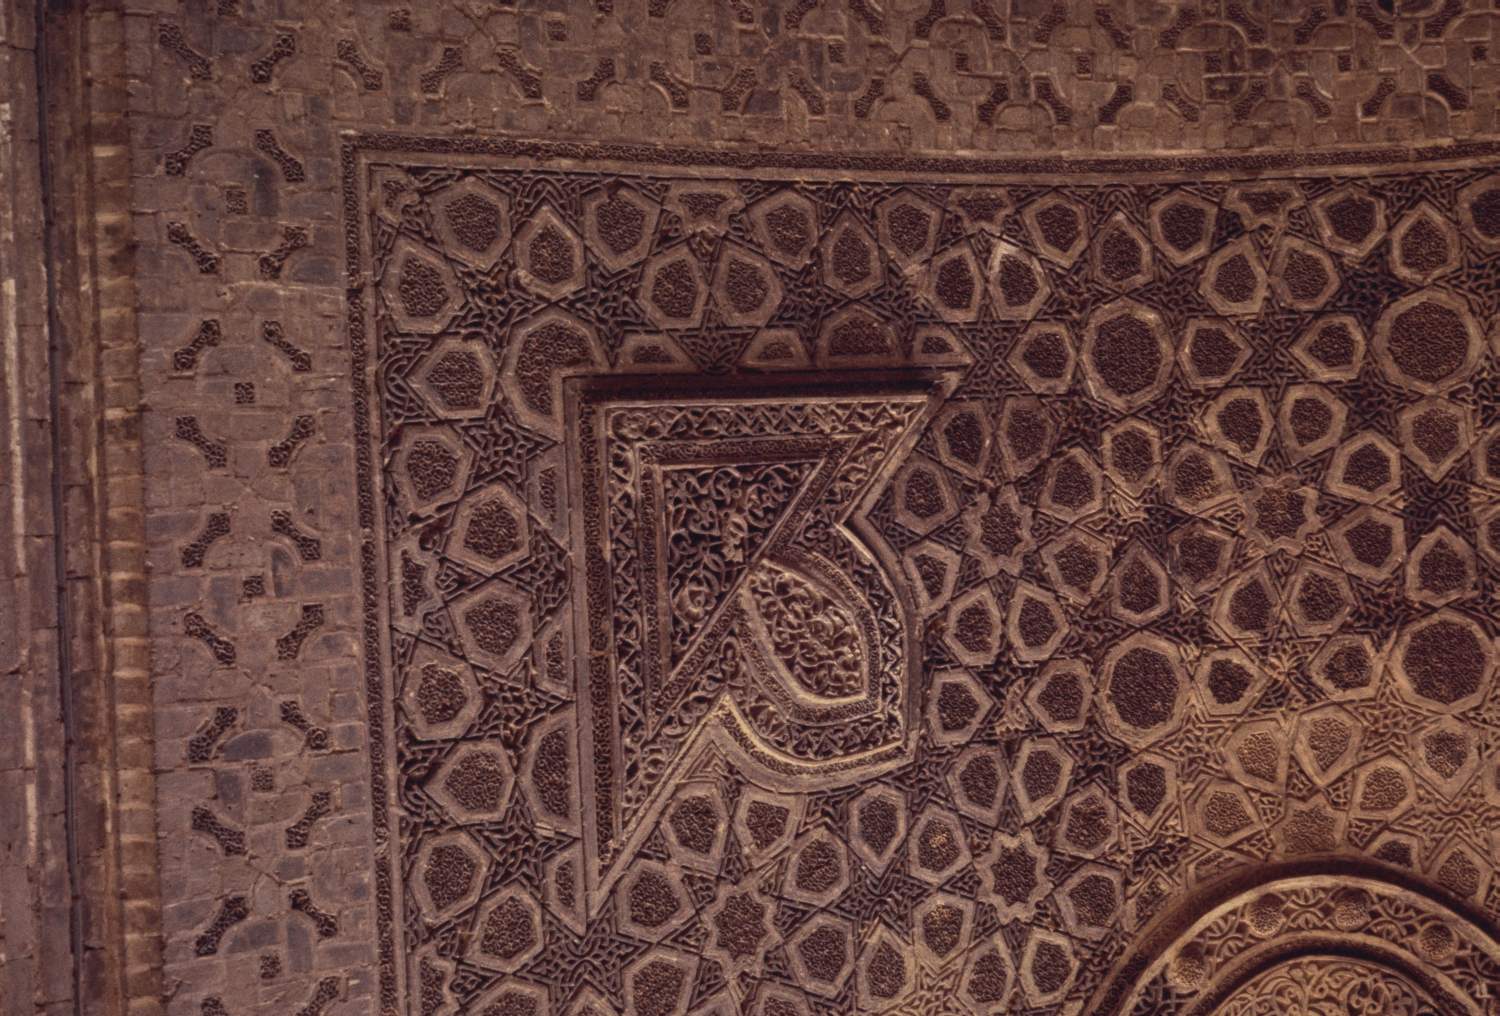 East iwan: view of vault showing carved geometric ornament.